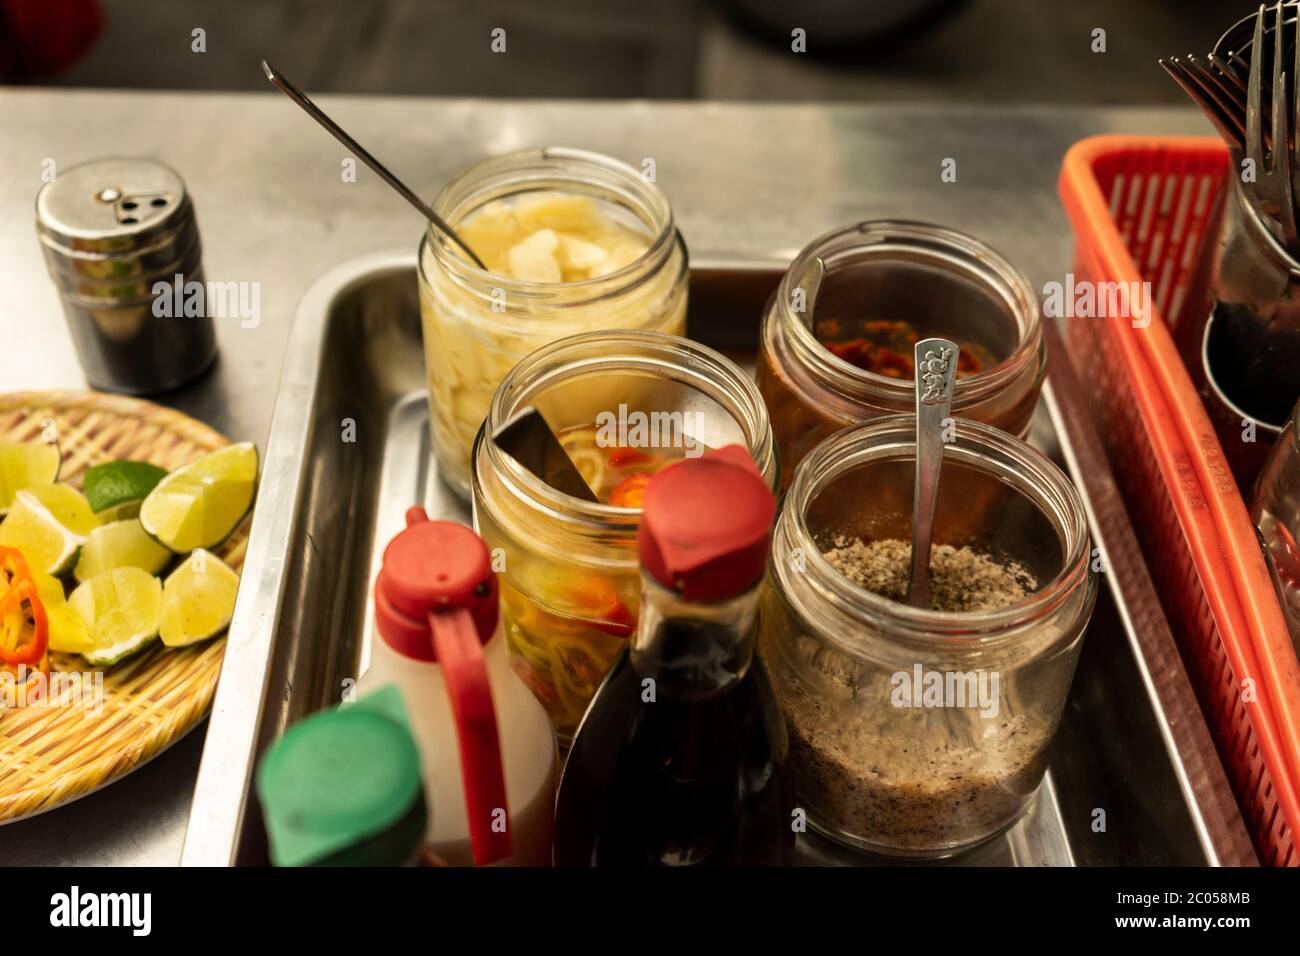 Traditional Vietnamese noodle condiment tray with dish of lemon slices, jar of chili, fish sauce, soy sauce, spoons and chopsticks at street food cart Stock Photo